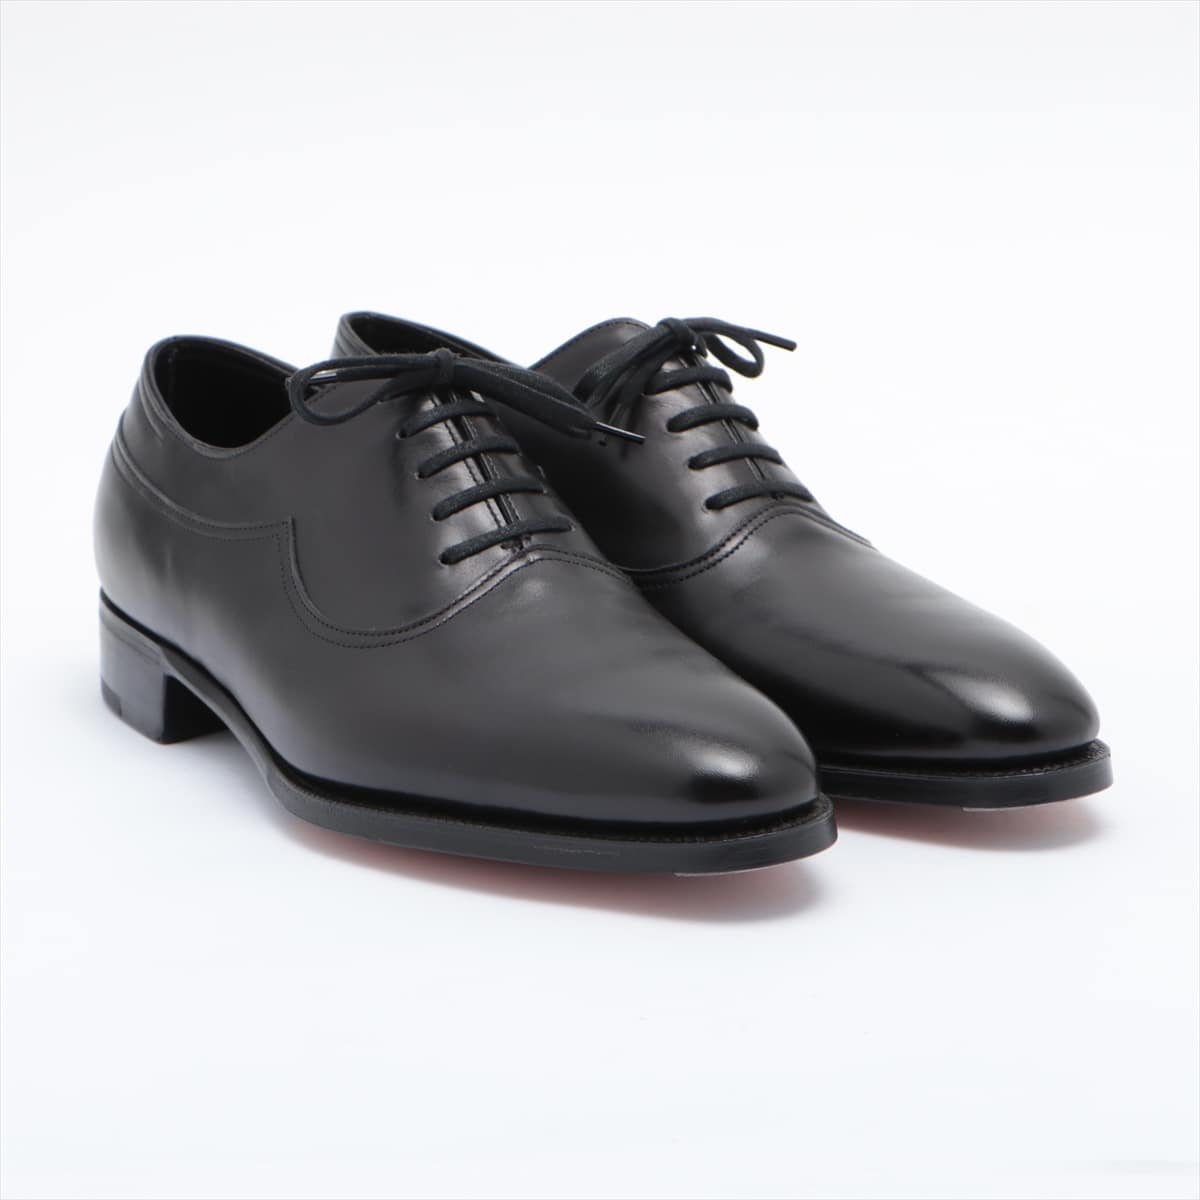 John Lobb Leather Leather shoes 7.5 Men's Black Comes with genuine shoe keeper